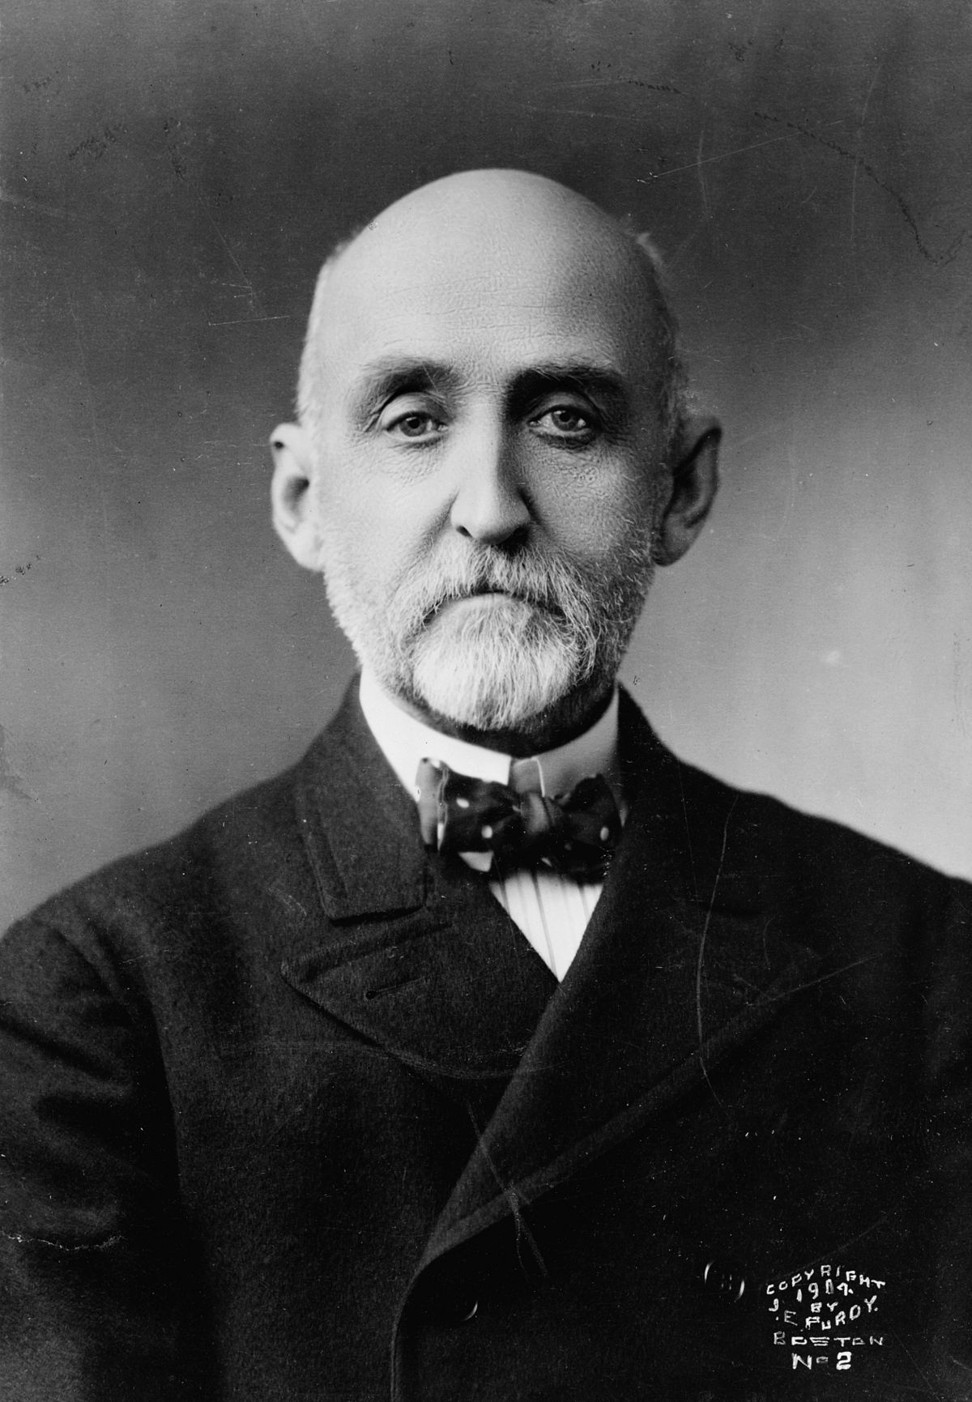 Captain Alfred Thayer Mahan, whose strategic writings were admired by President Theodore Roosevelt.